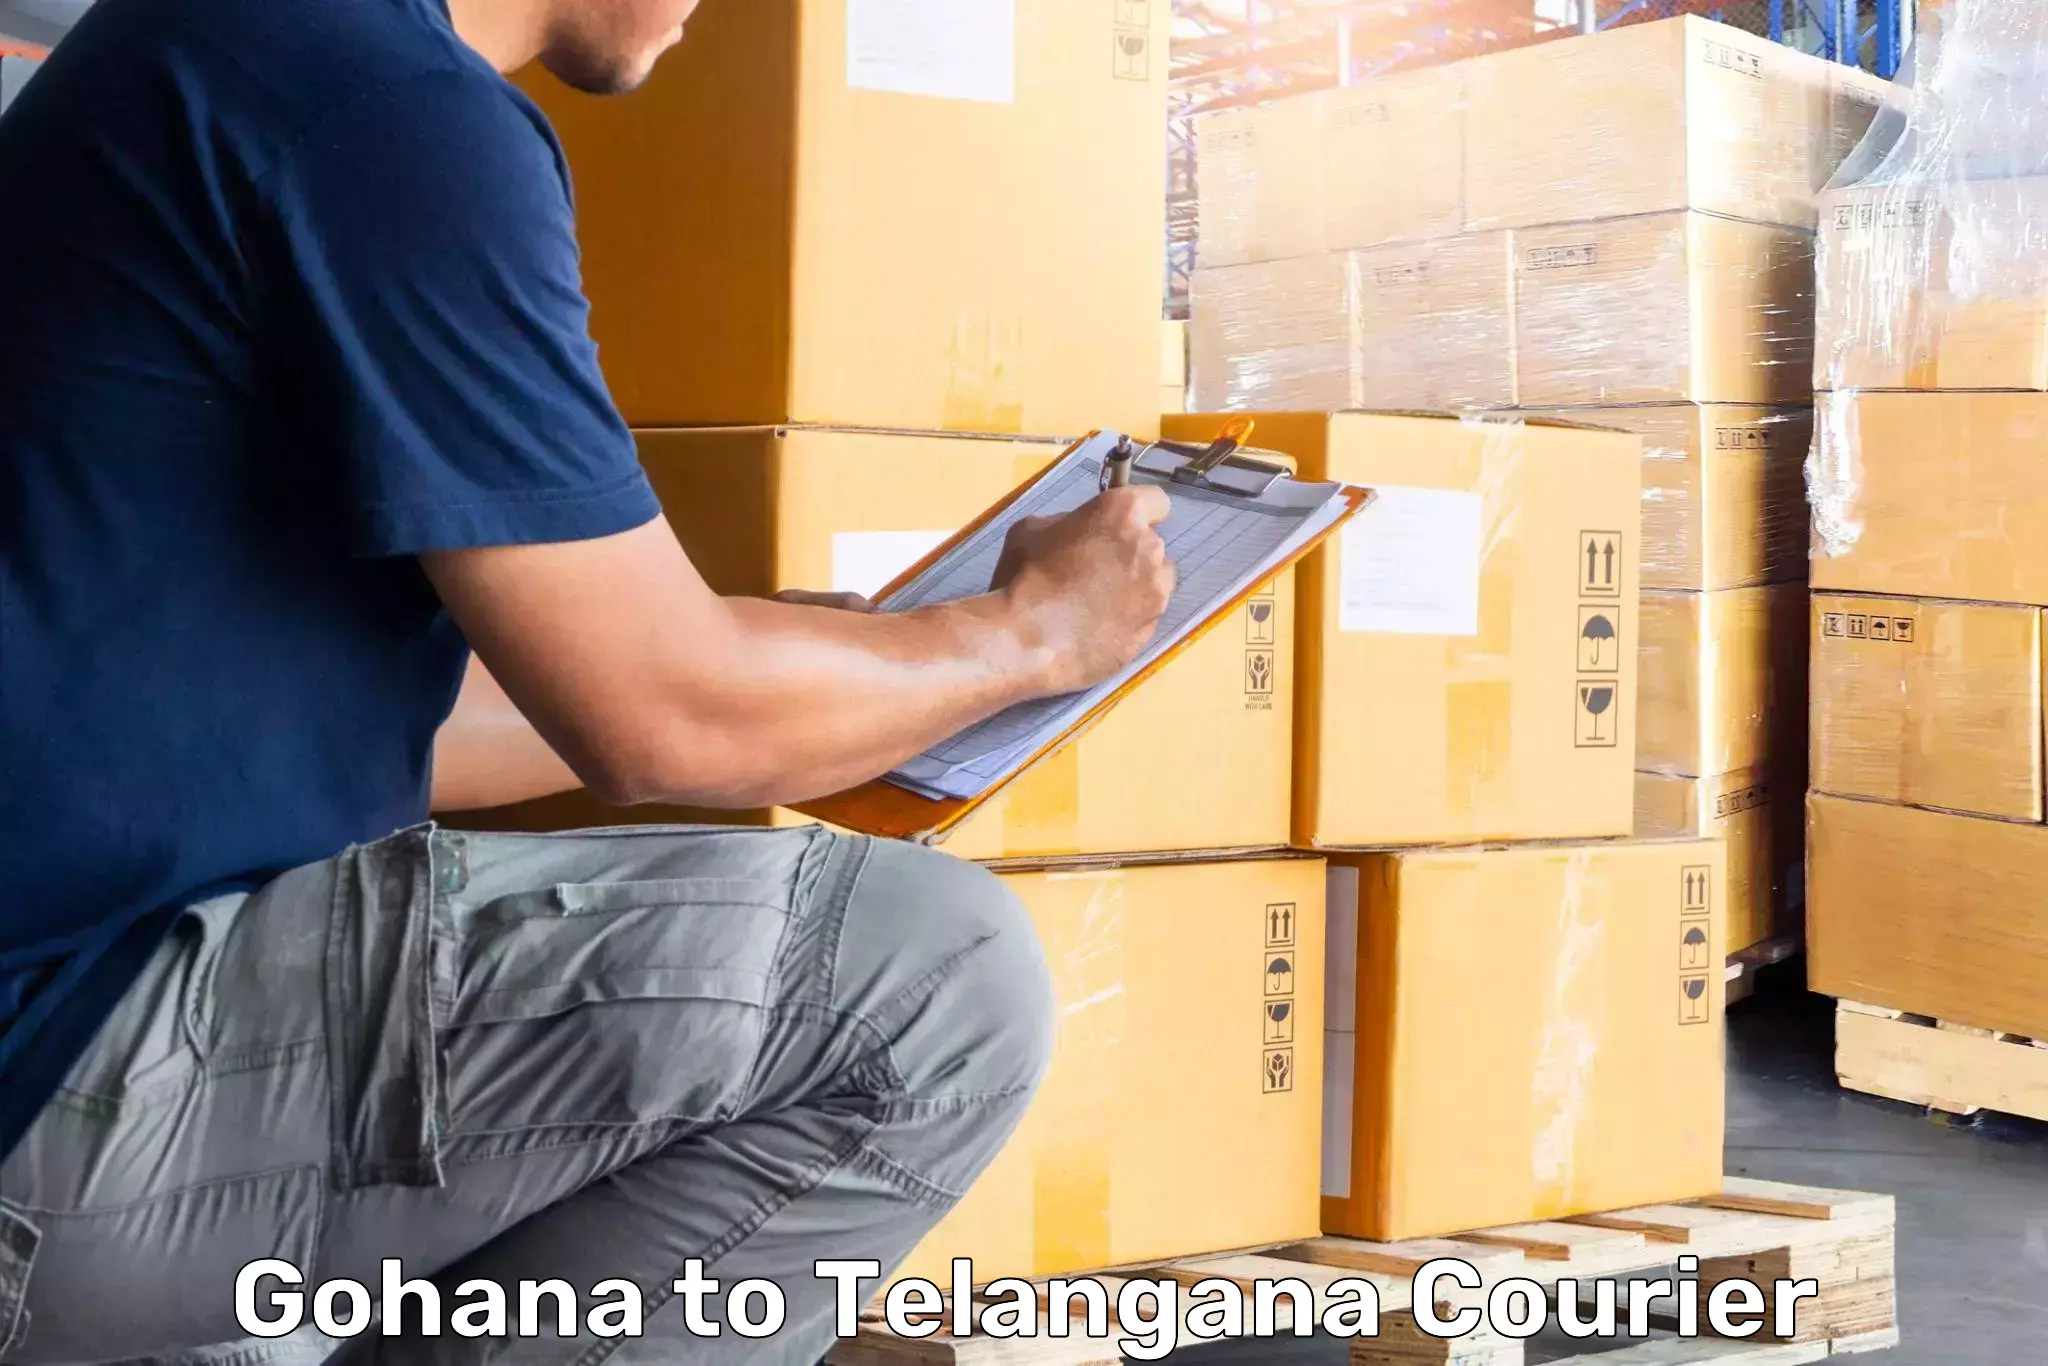 Baggage delivery scheduling Gohana to Manneguda